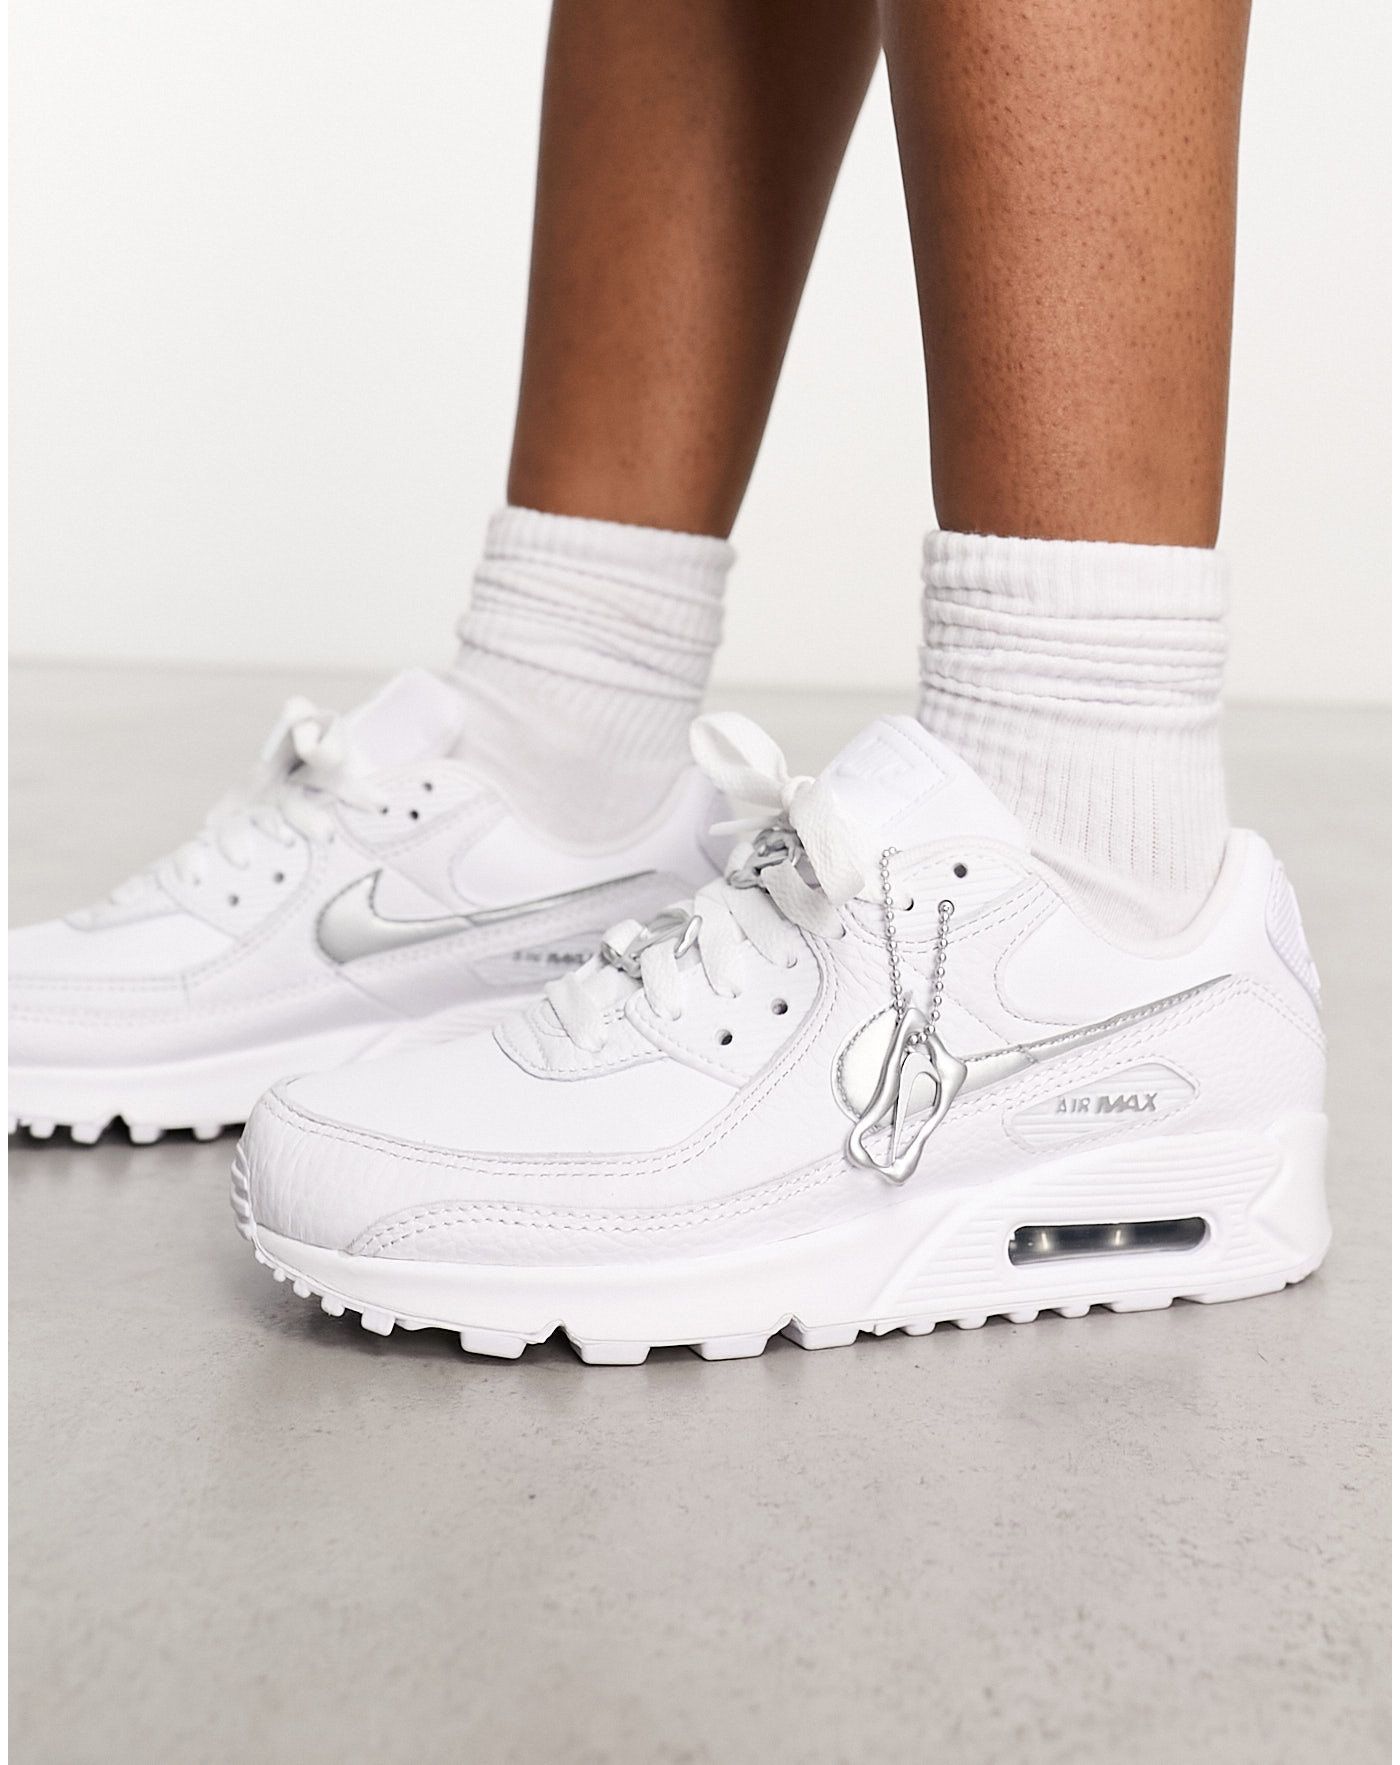 Nike Air Max 90 trainers in white and silver jewellery